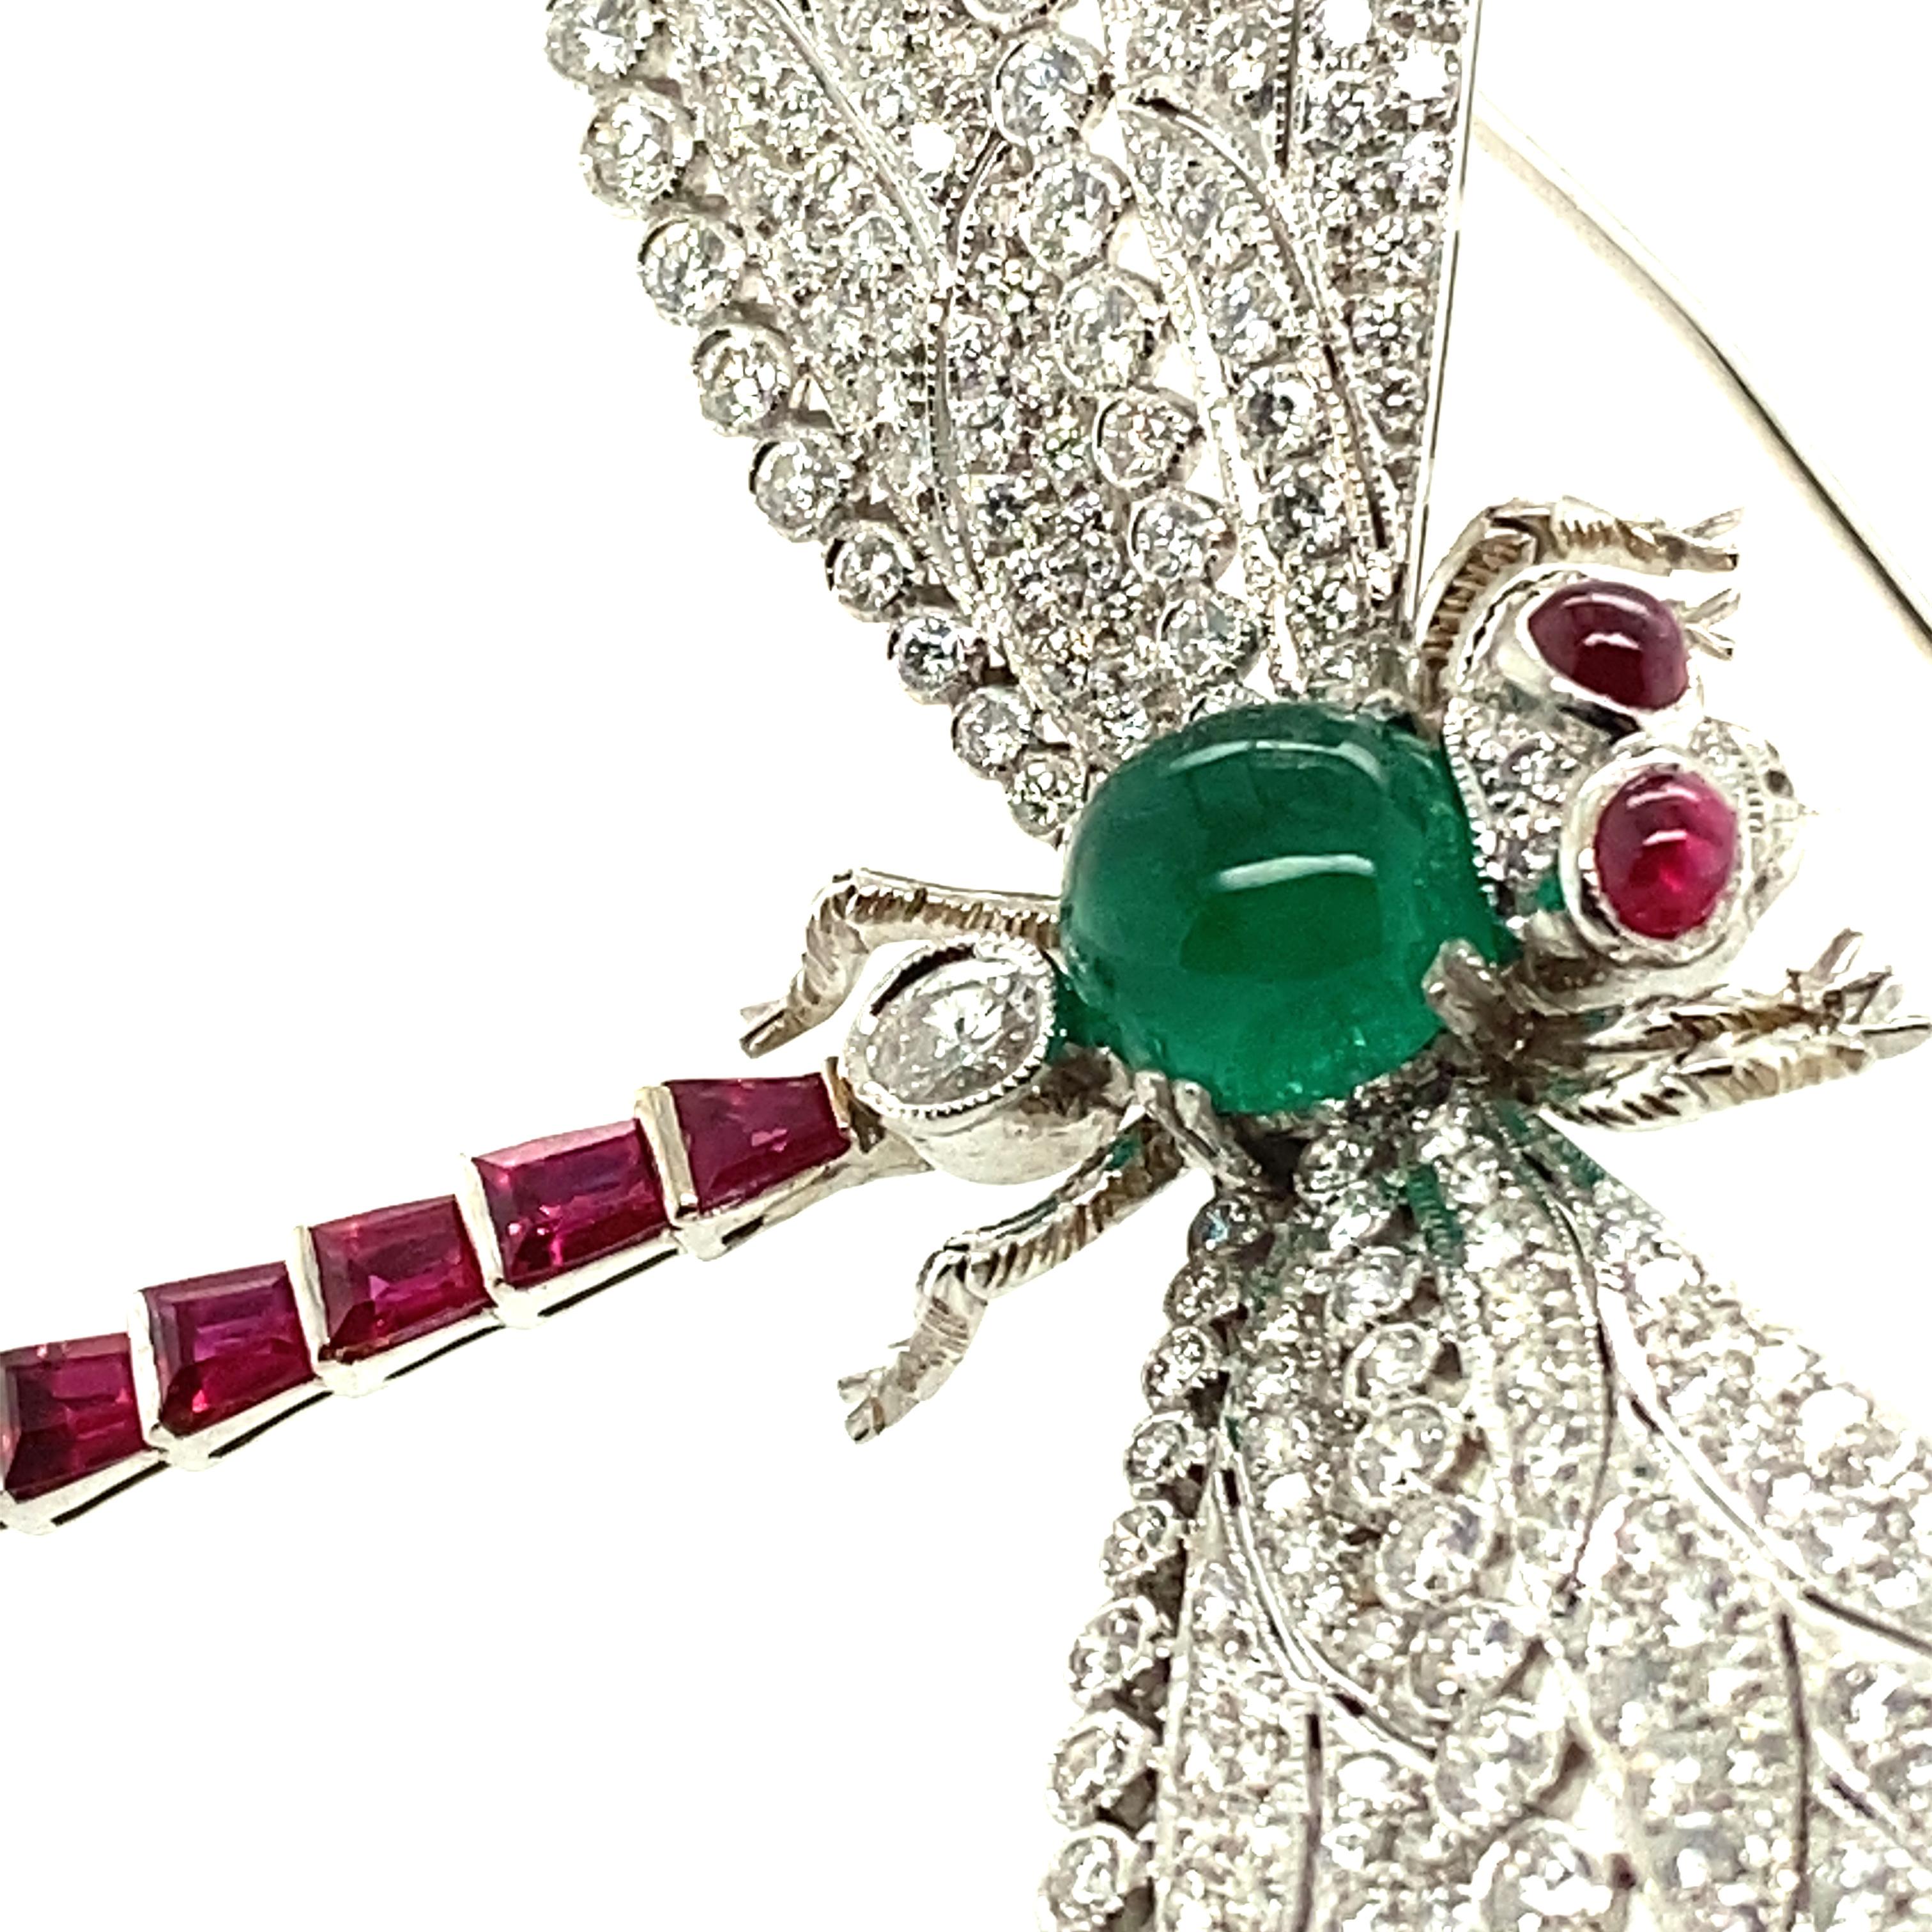 Contemporary Spectacular Art Deco Style Dragonfly Brooch in 18 Karat White Gold